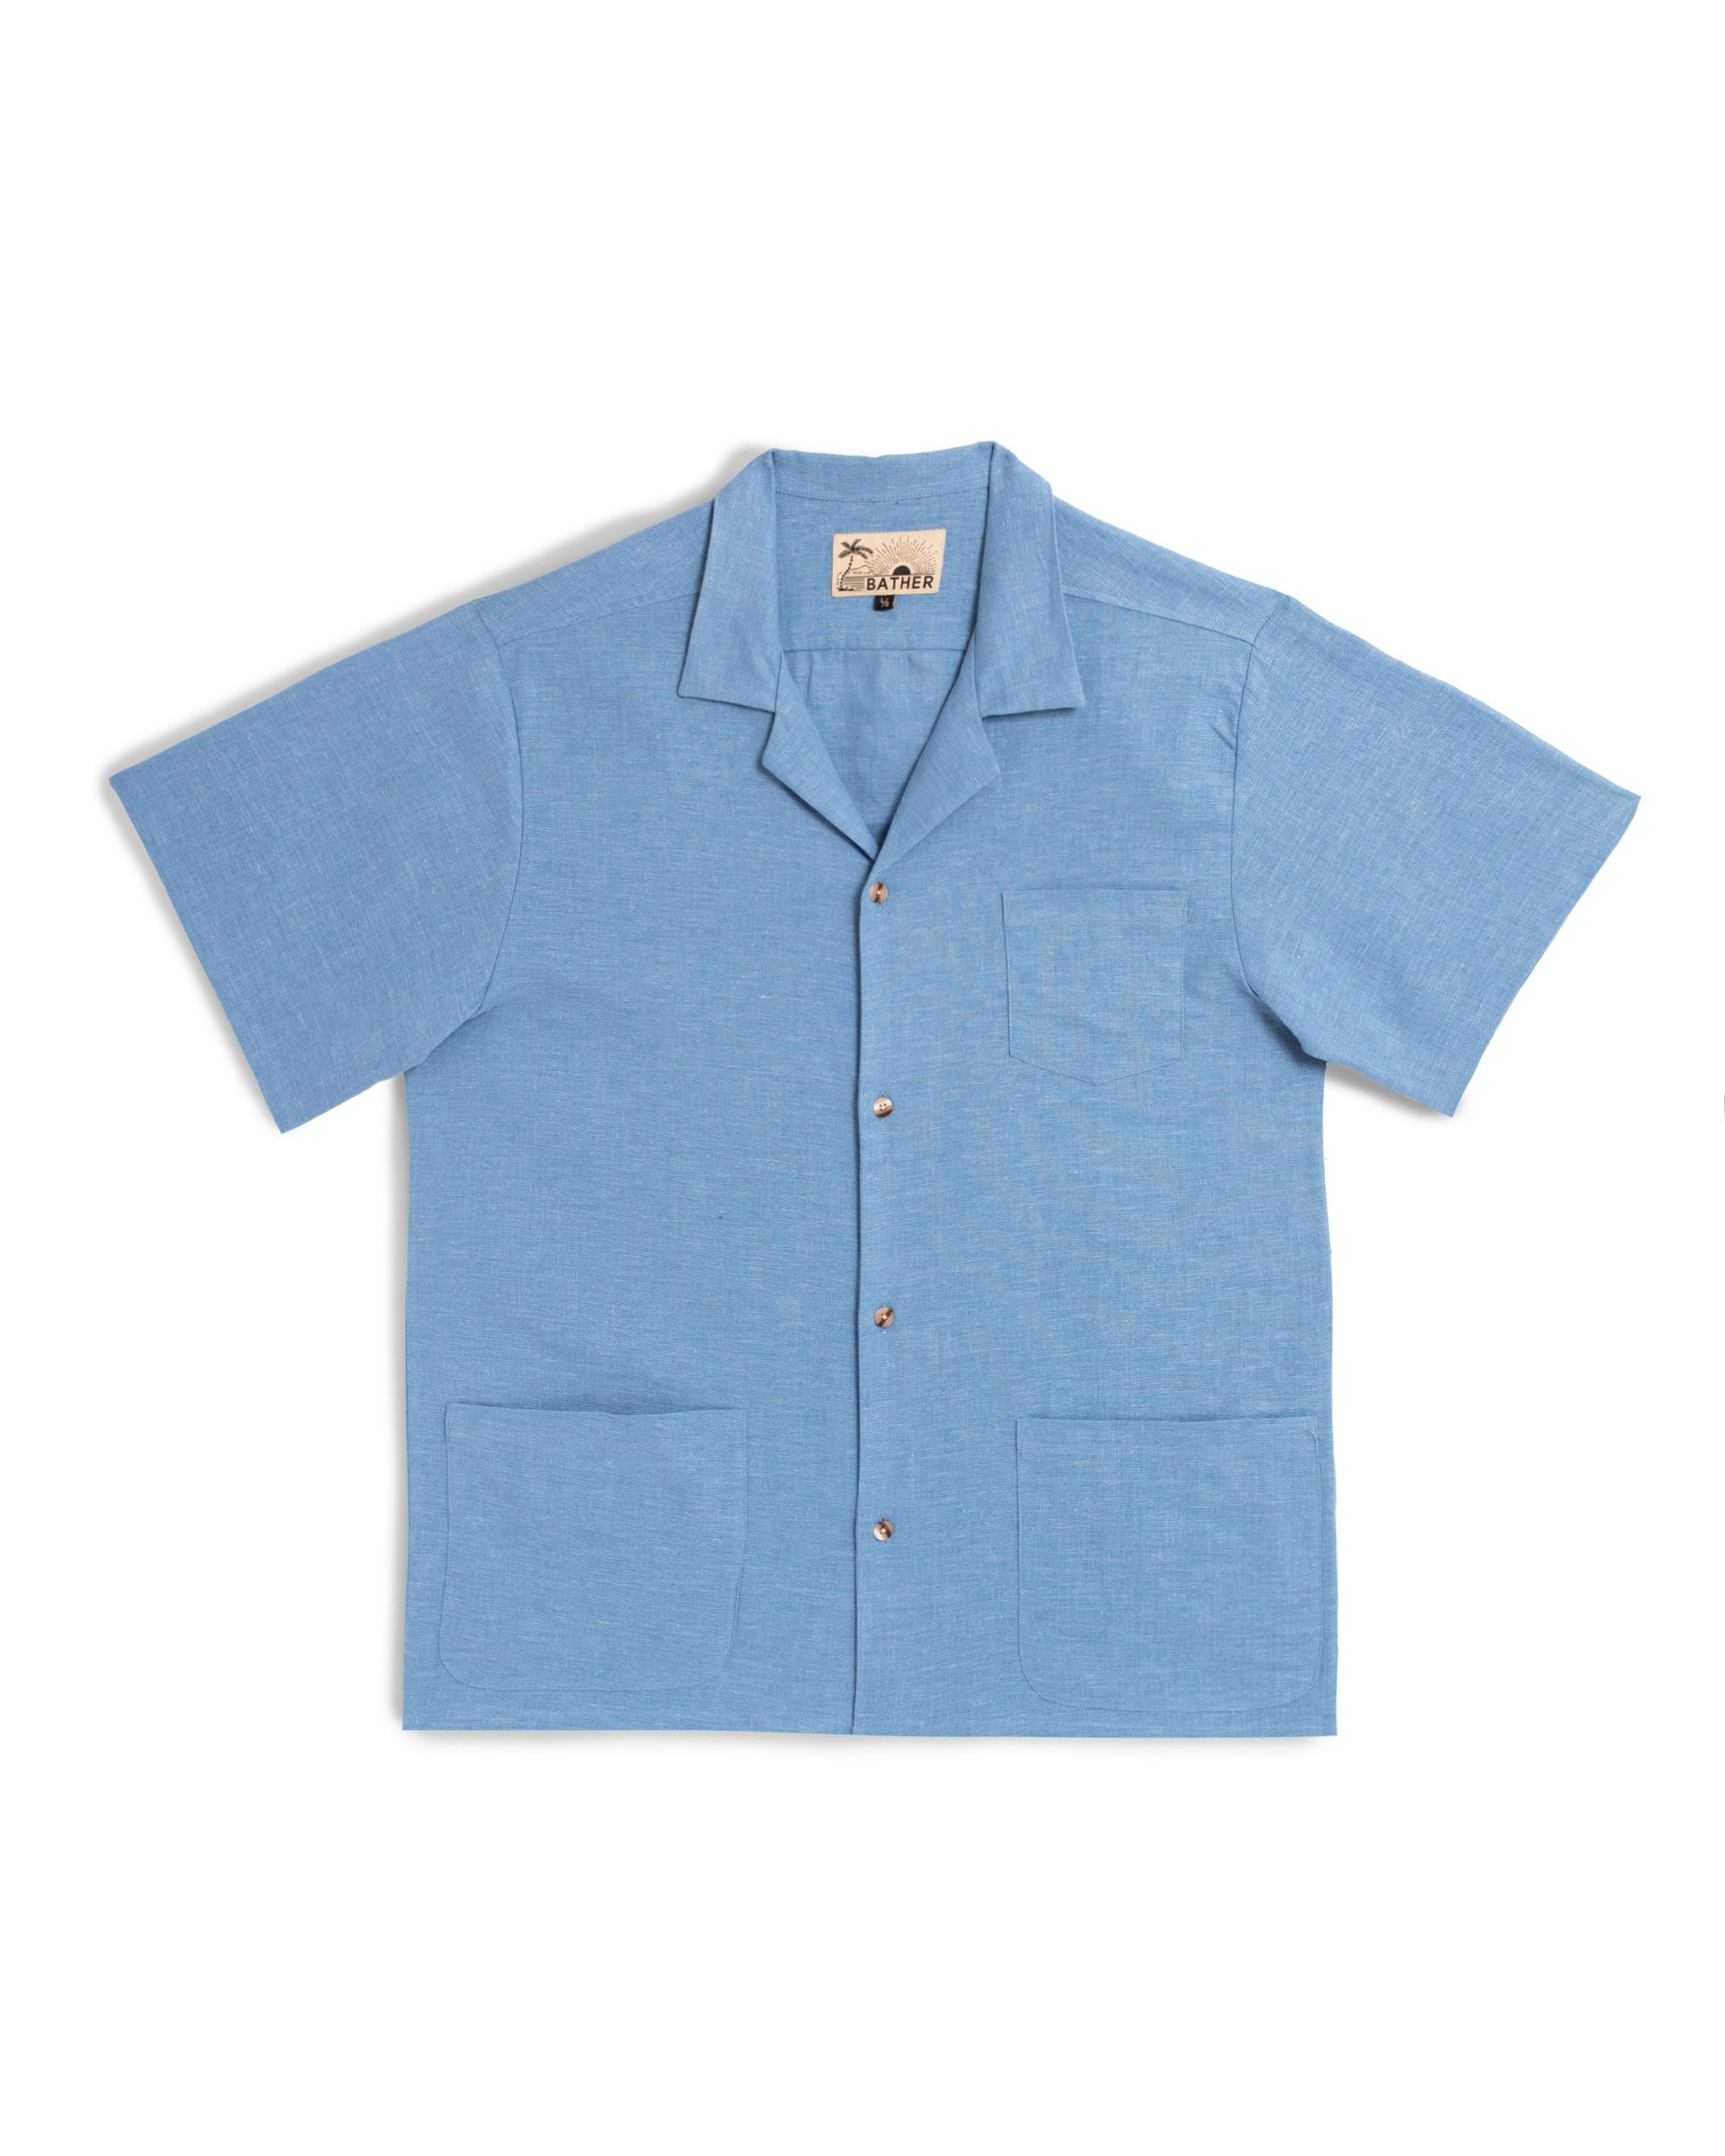 Blue linen camp shirt with a chest pocket and two bottom front pockets